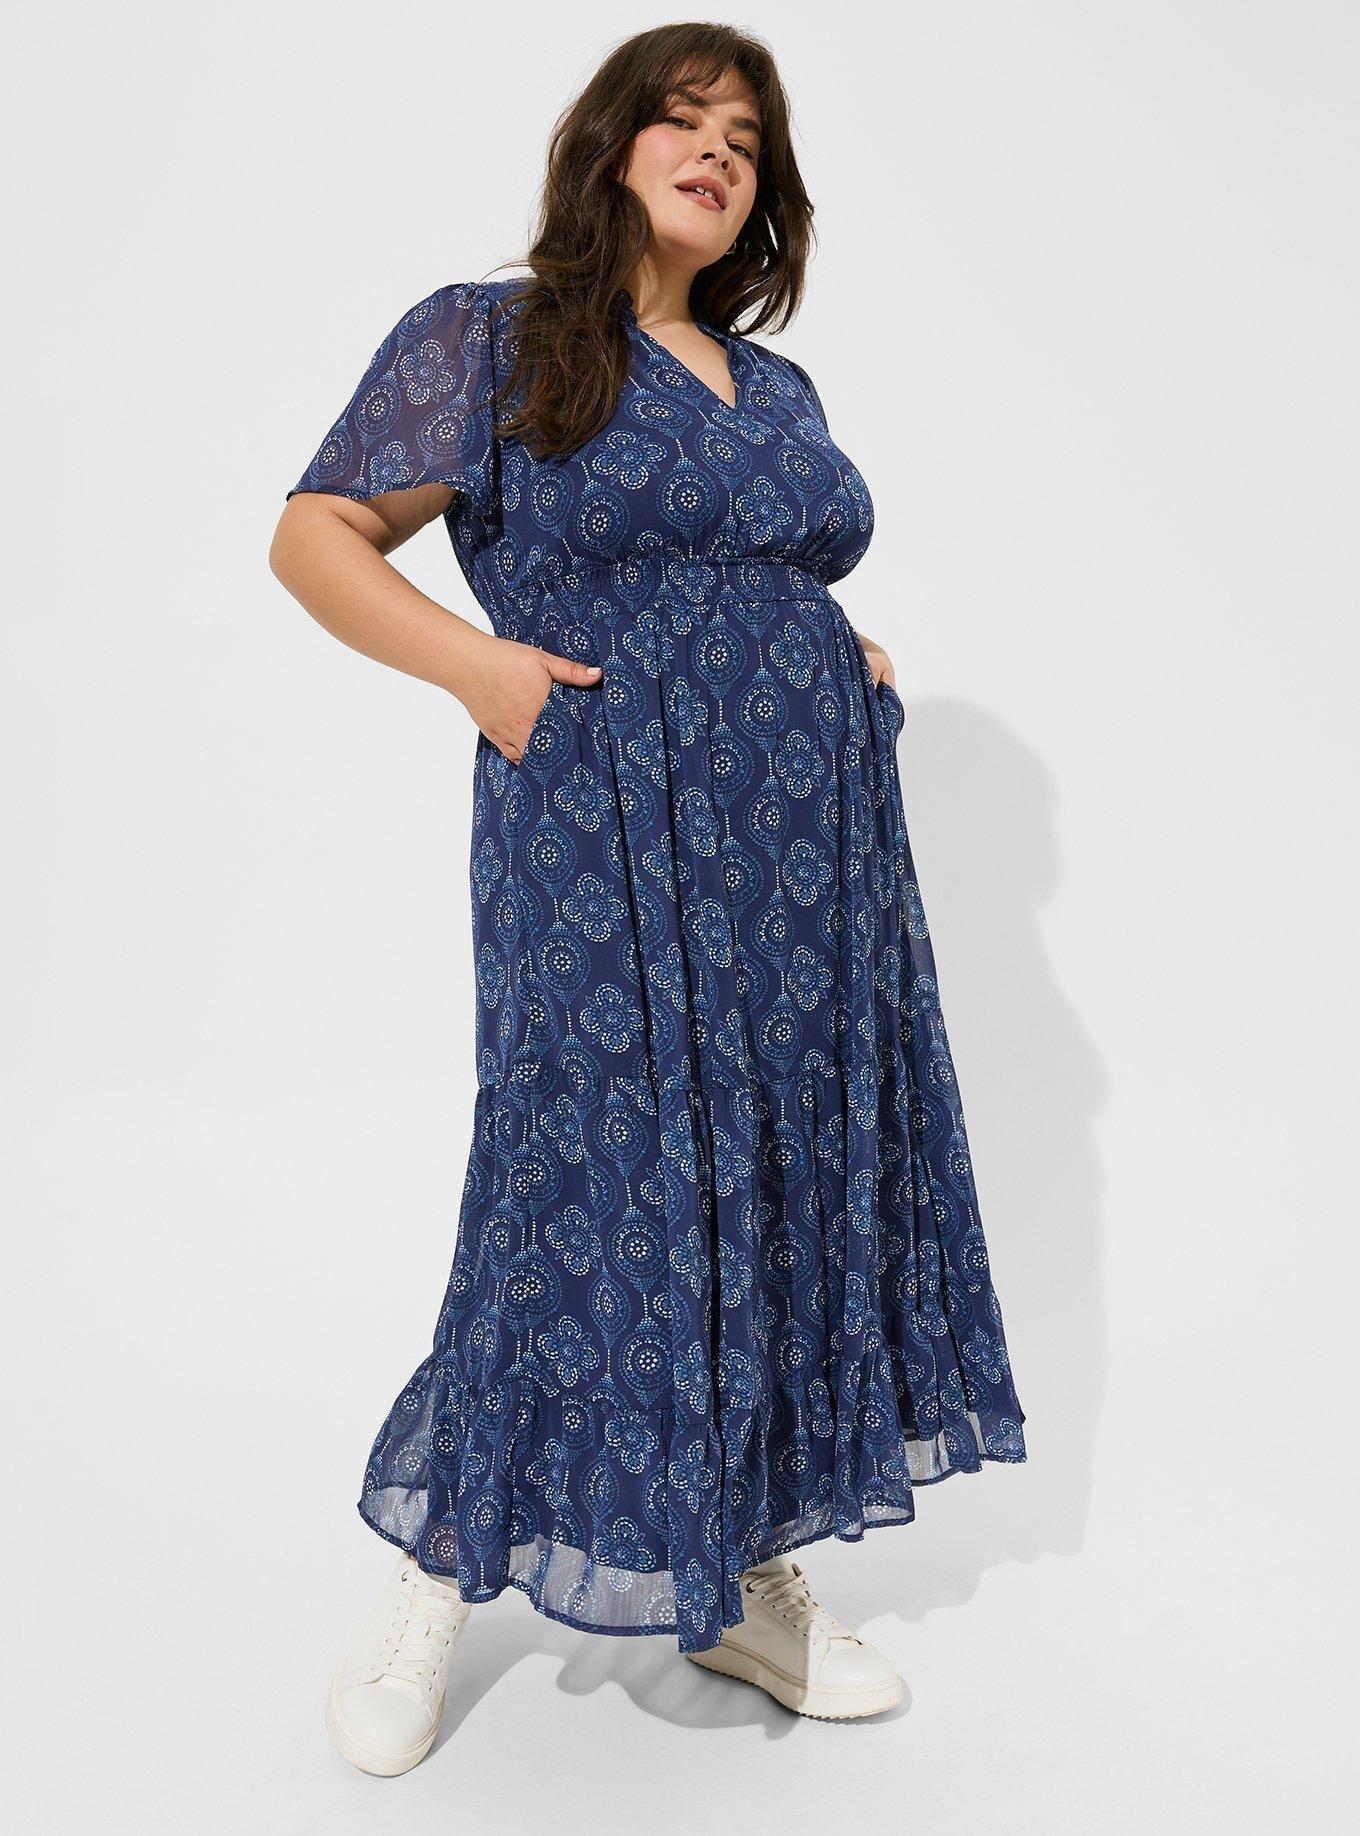 Skims dress on a size 16, Gallery posted by Flora